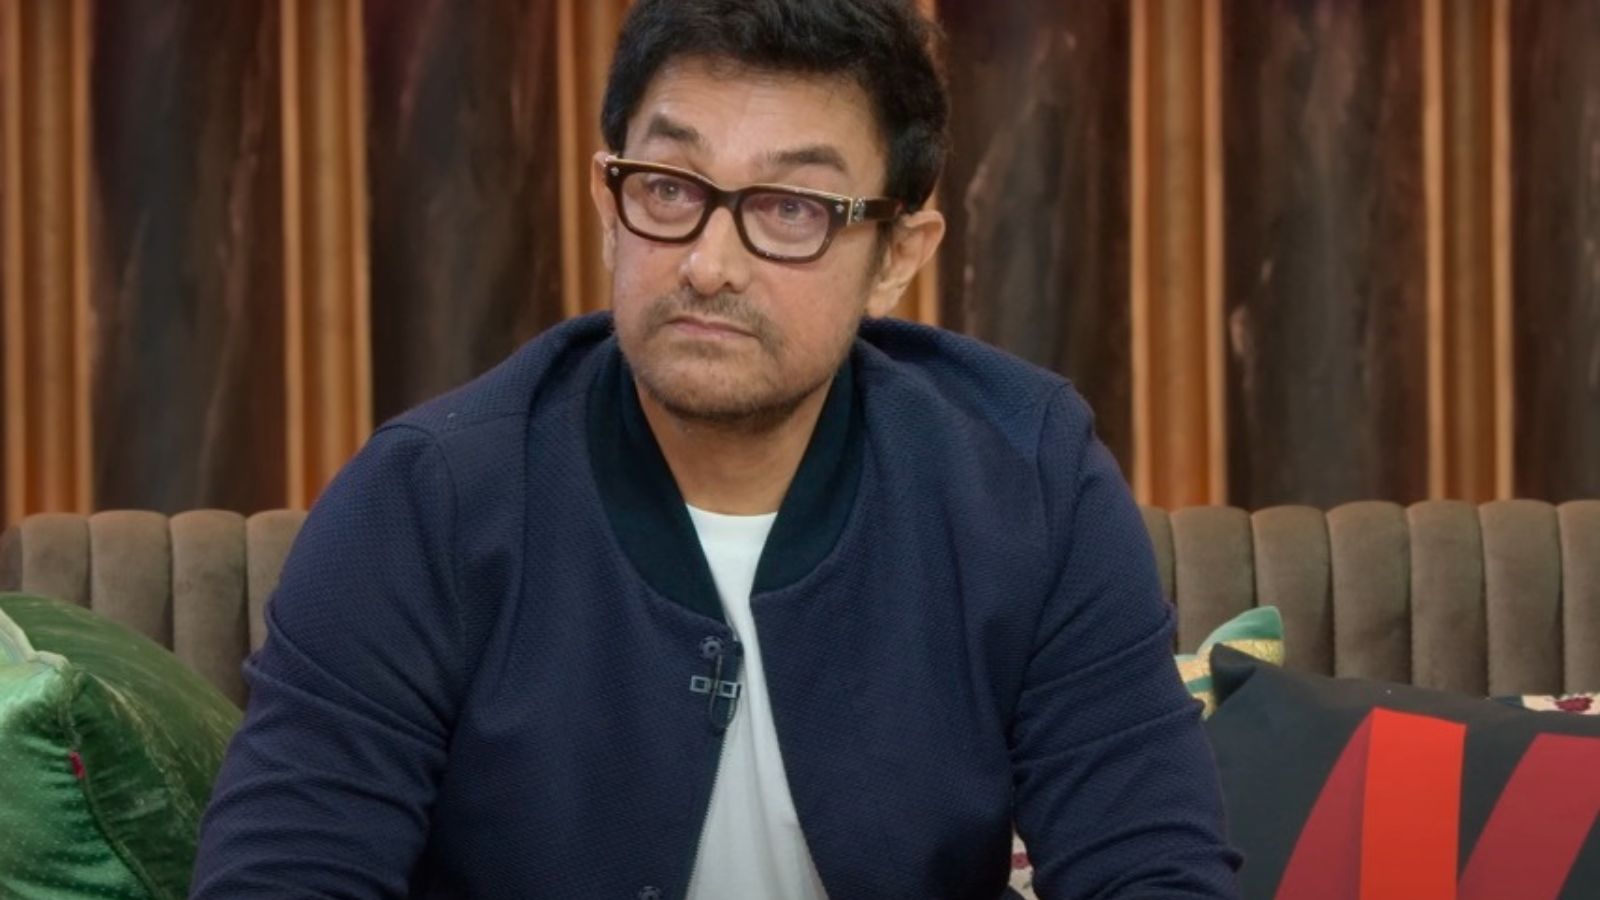 Kapil Sharma asks Aamir Khan when he's going to settle down, the actor answers why he doesn't go to award shows: Time is precious, you have to do it |  Web series news